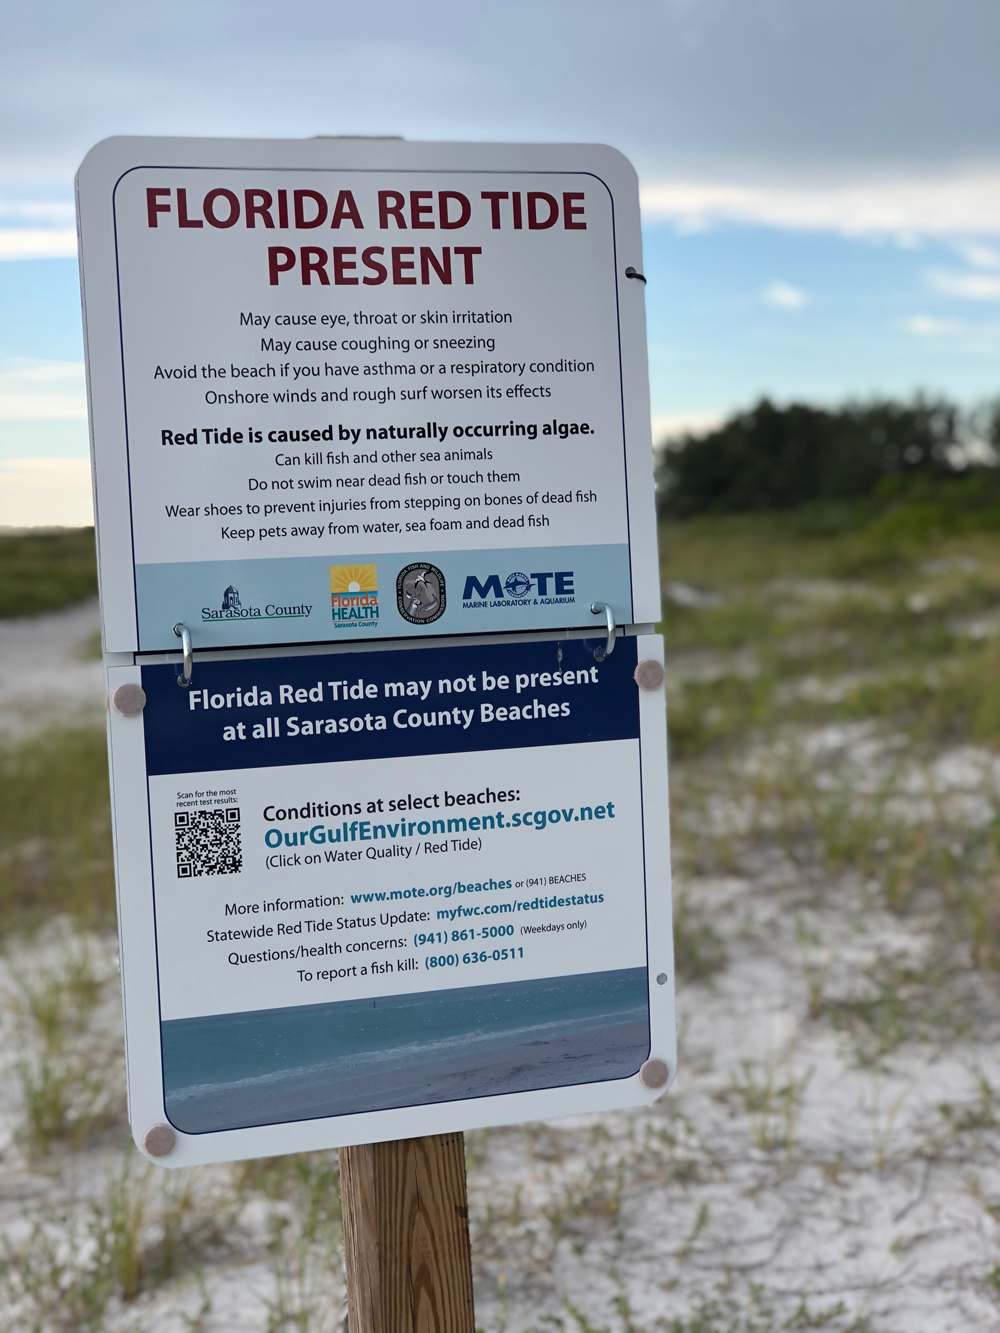 Red tide warning at Lido Key Beach in Sarasota county. Photo courtesy of Eillin Delapaz.